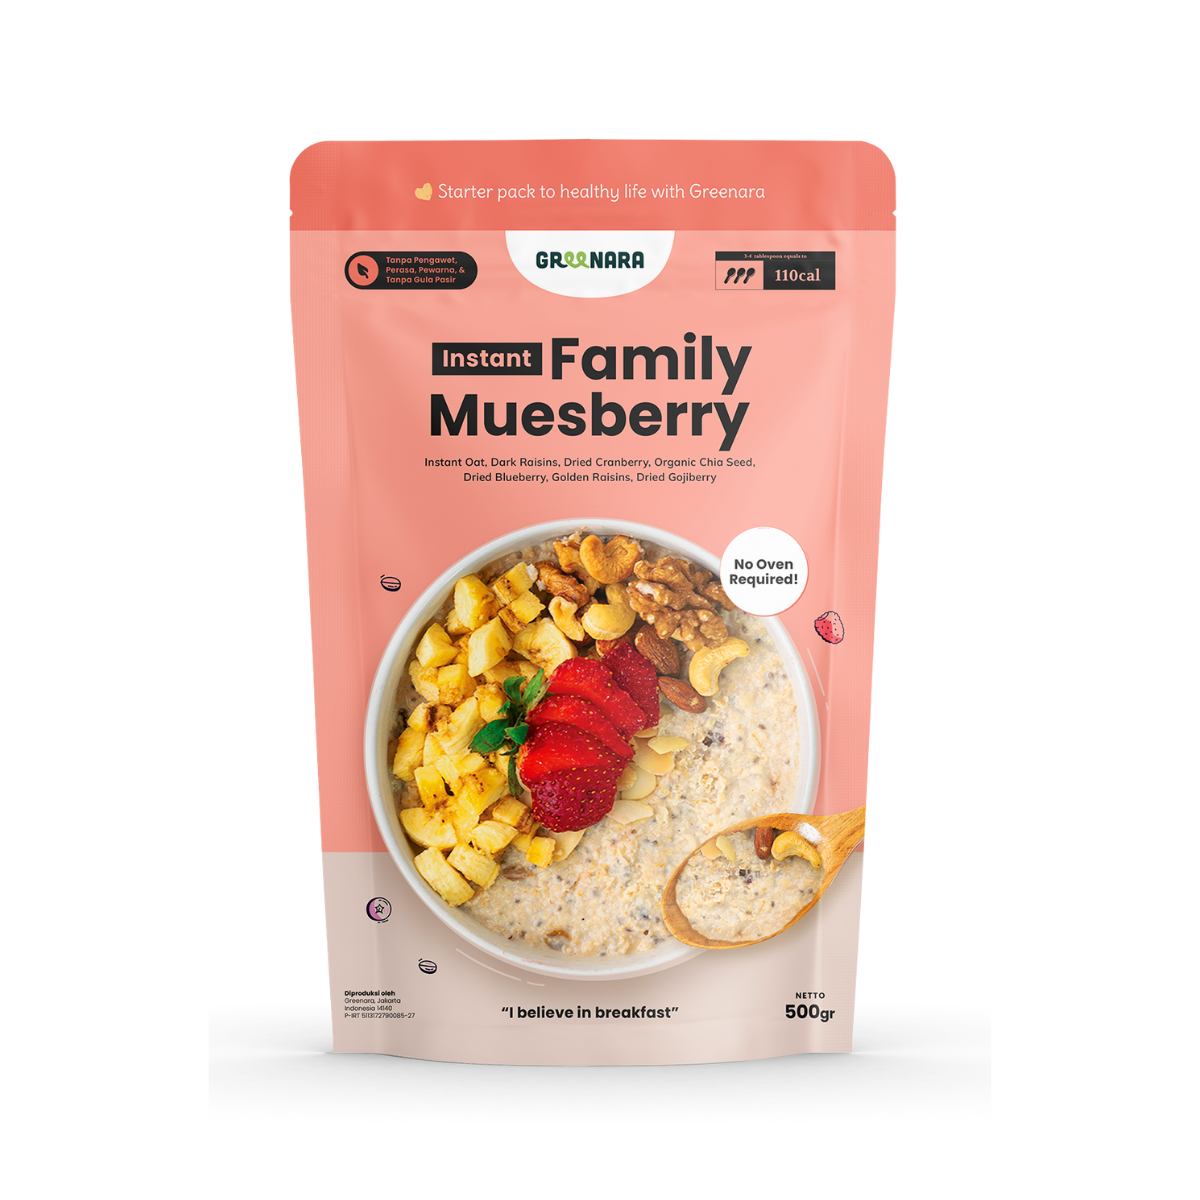 Instant Family Muesberry / Sarapan Sehat